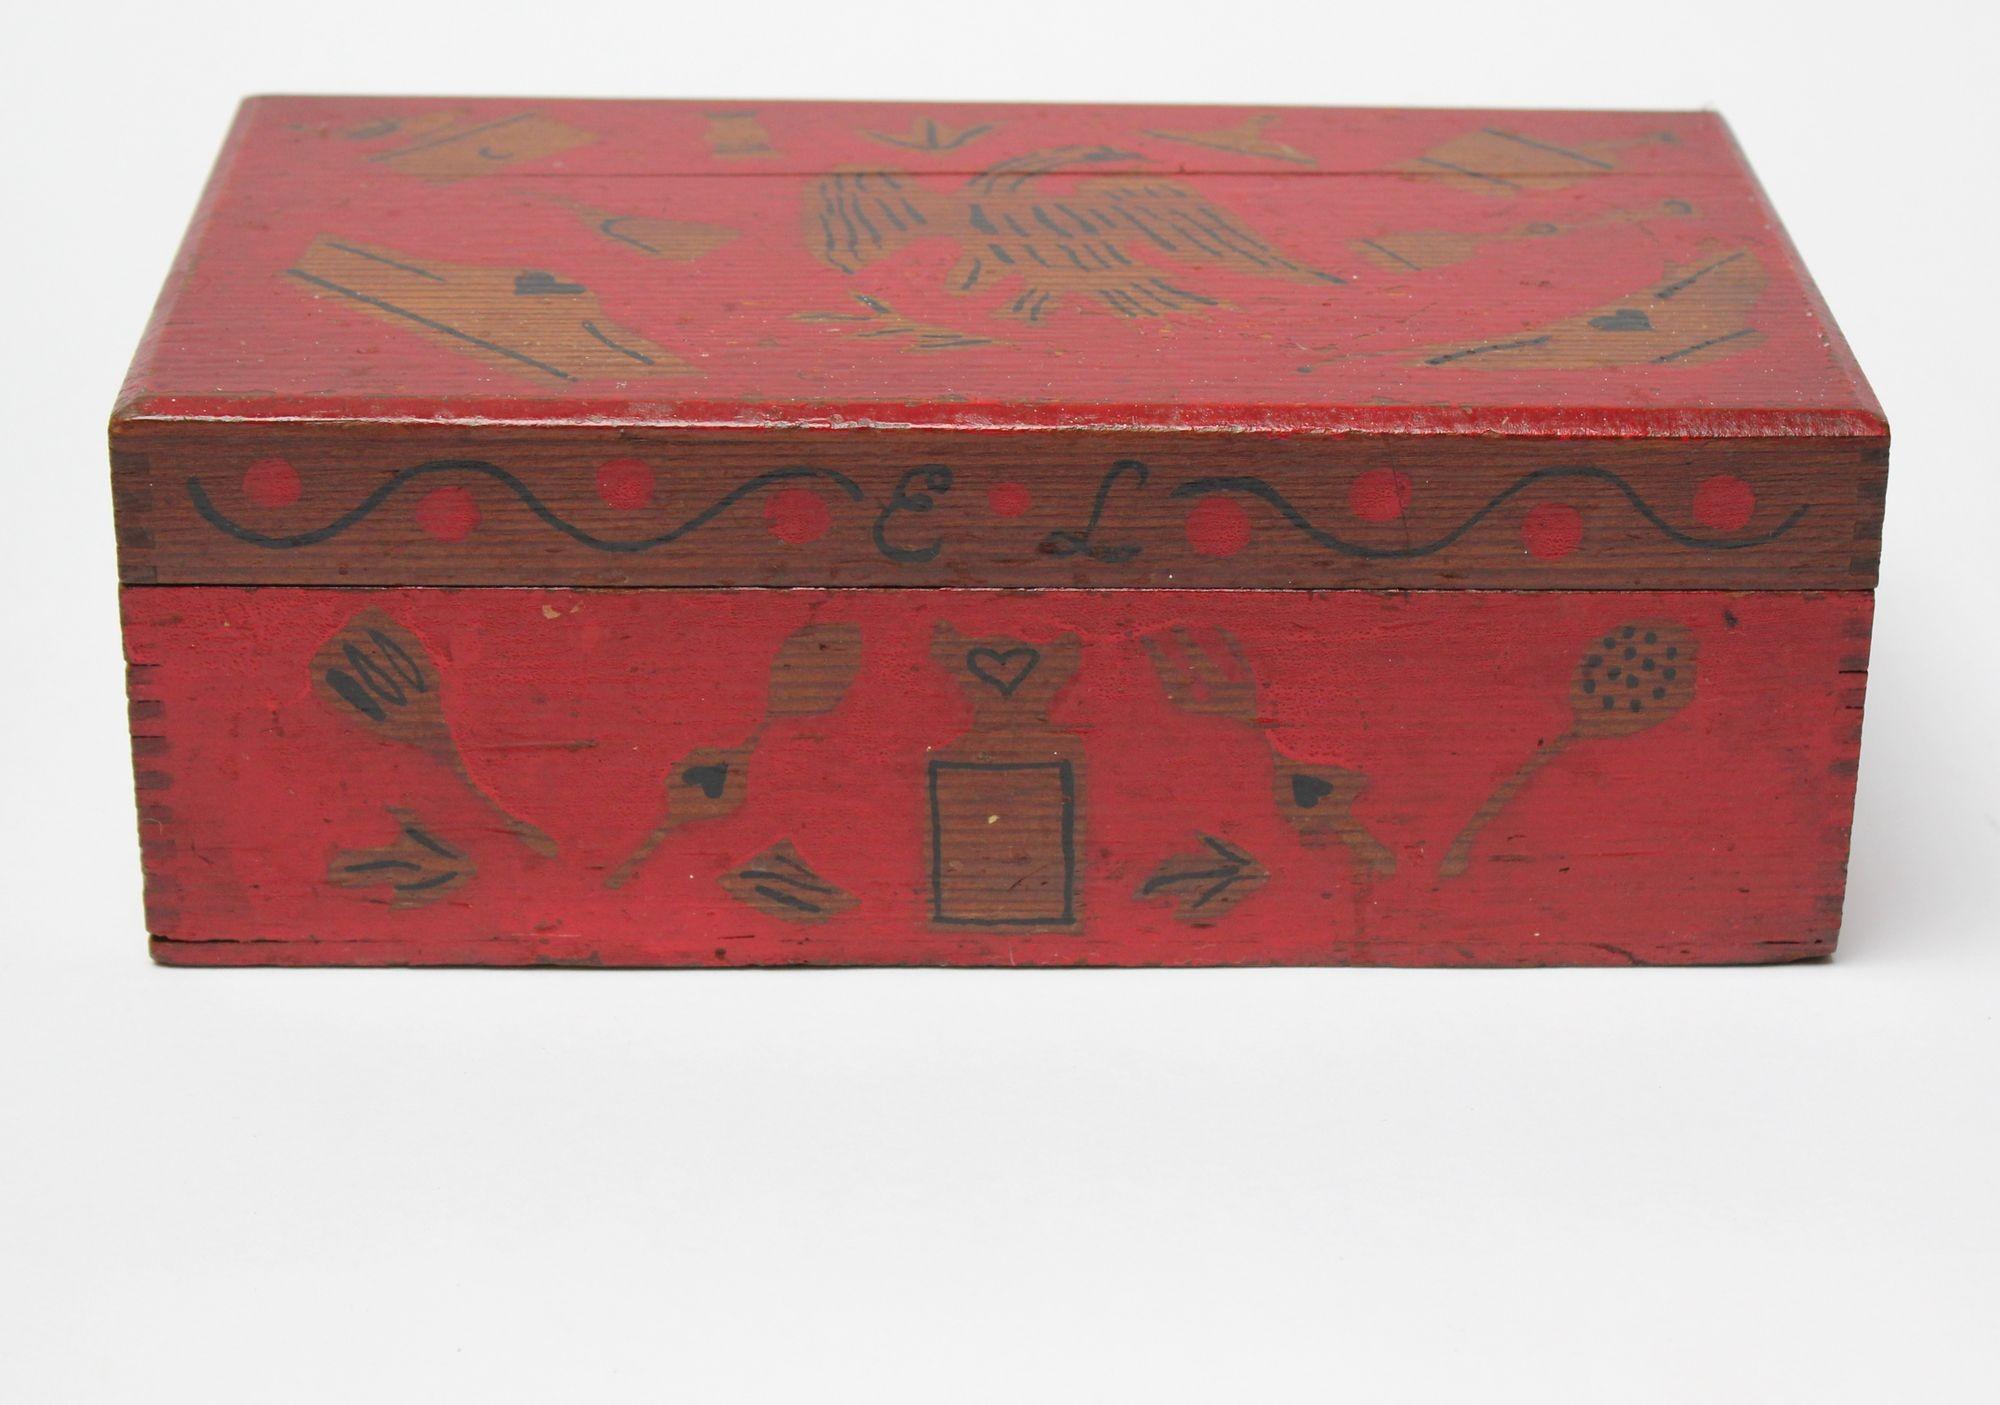 Folk art decorative box with eagle motif in attractive red paint (ca. 1910-1920, USA). The hinged top opens to reveal a divided storage compartment, perfect for housing small accessories (jewelry, cufflinks, etc.). 
Imagery is created in a